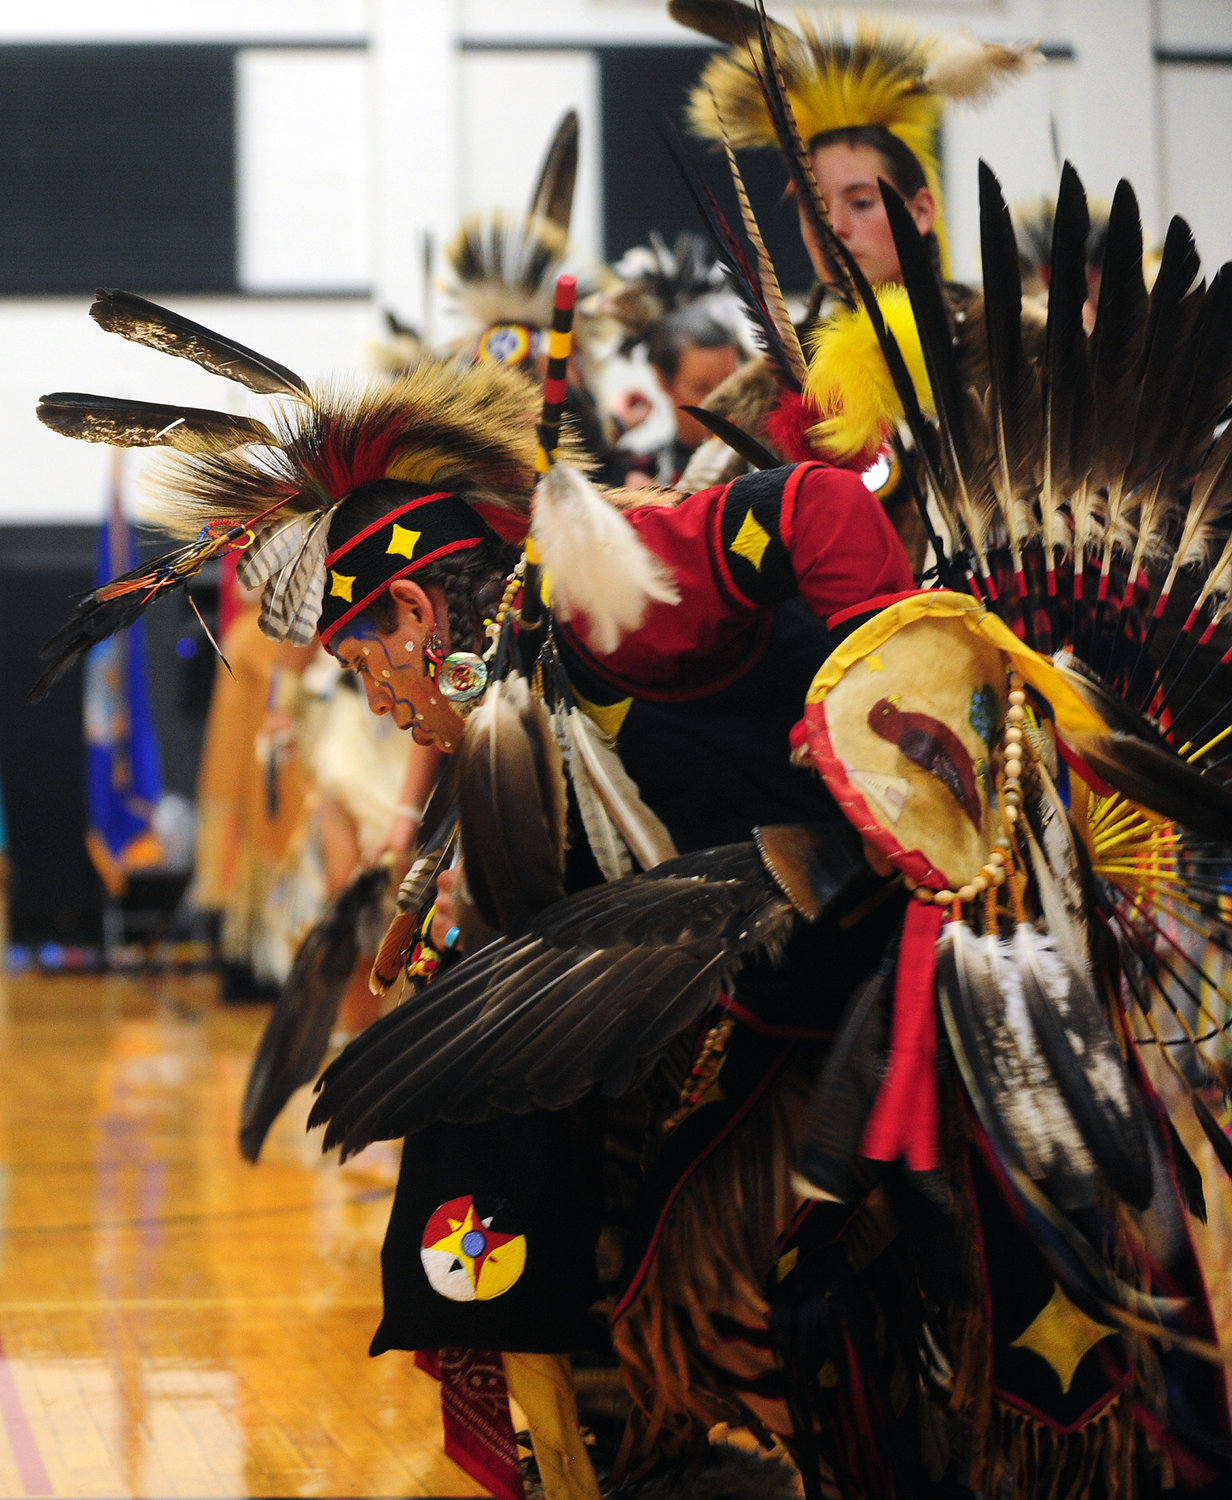 J.C. Allen-Tackett, Silverdale, dances during an intertribal dance at the Cowlitz Indian Tribe's 14th Annual Pow-Wow at Toledo High School on Saturday afternoon.